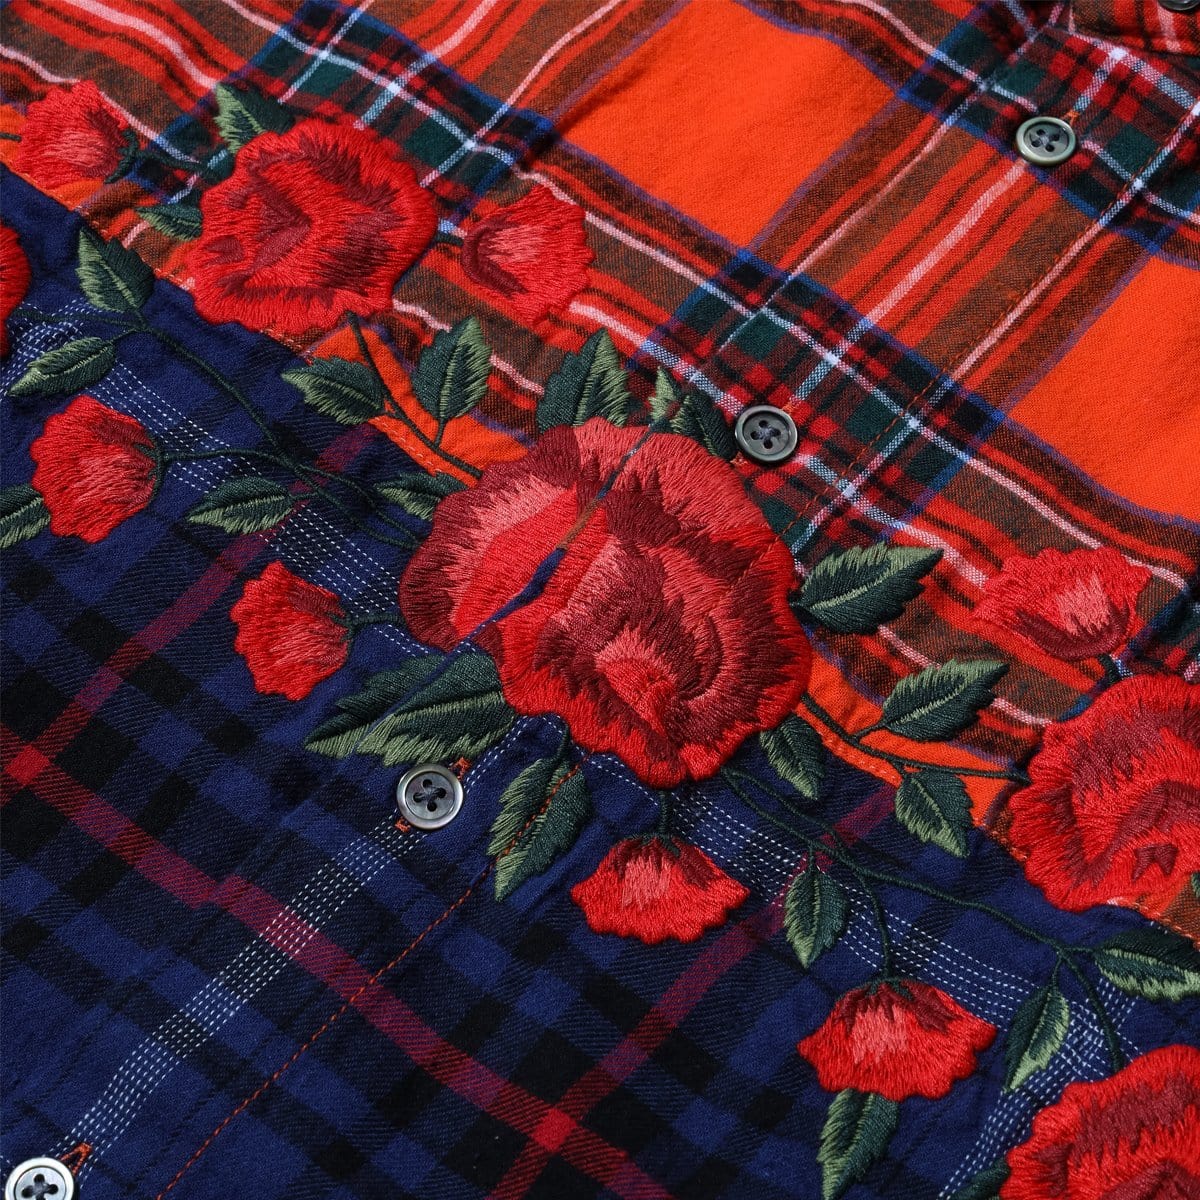 Awake NY Shirts EMBROIDERED ROSE FLANNEL